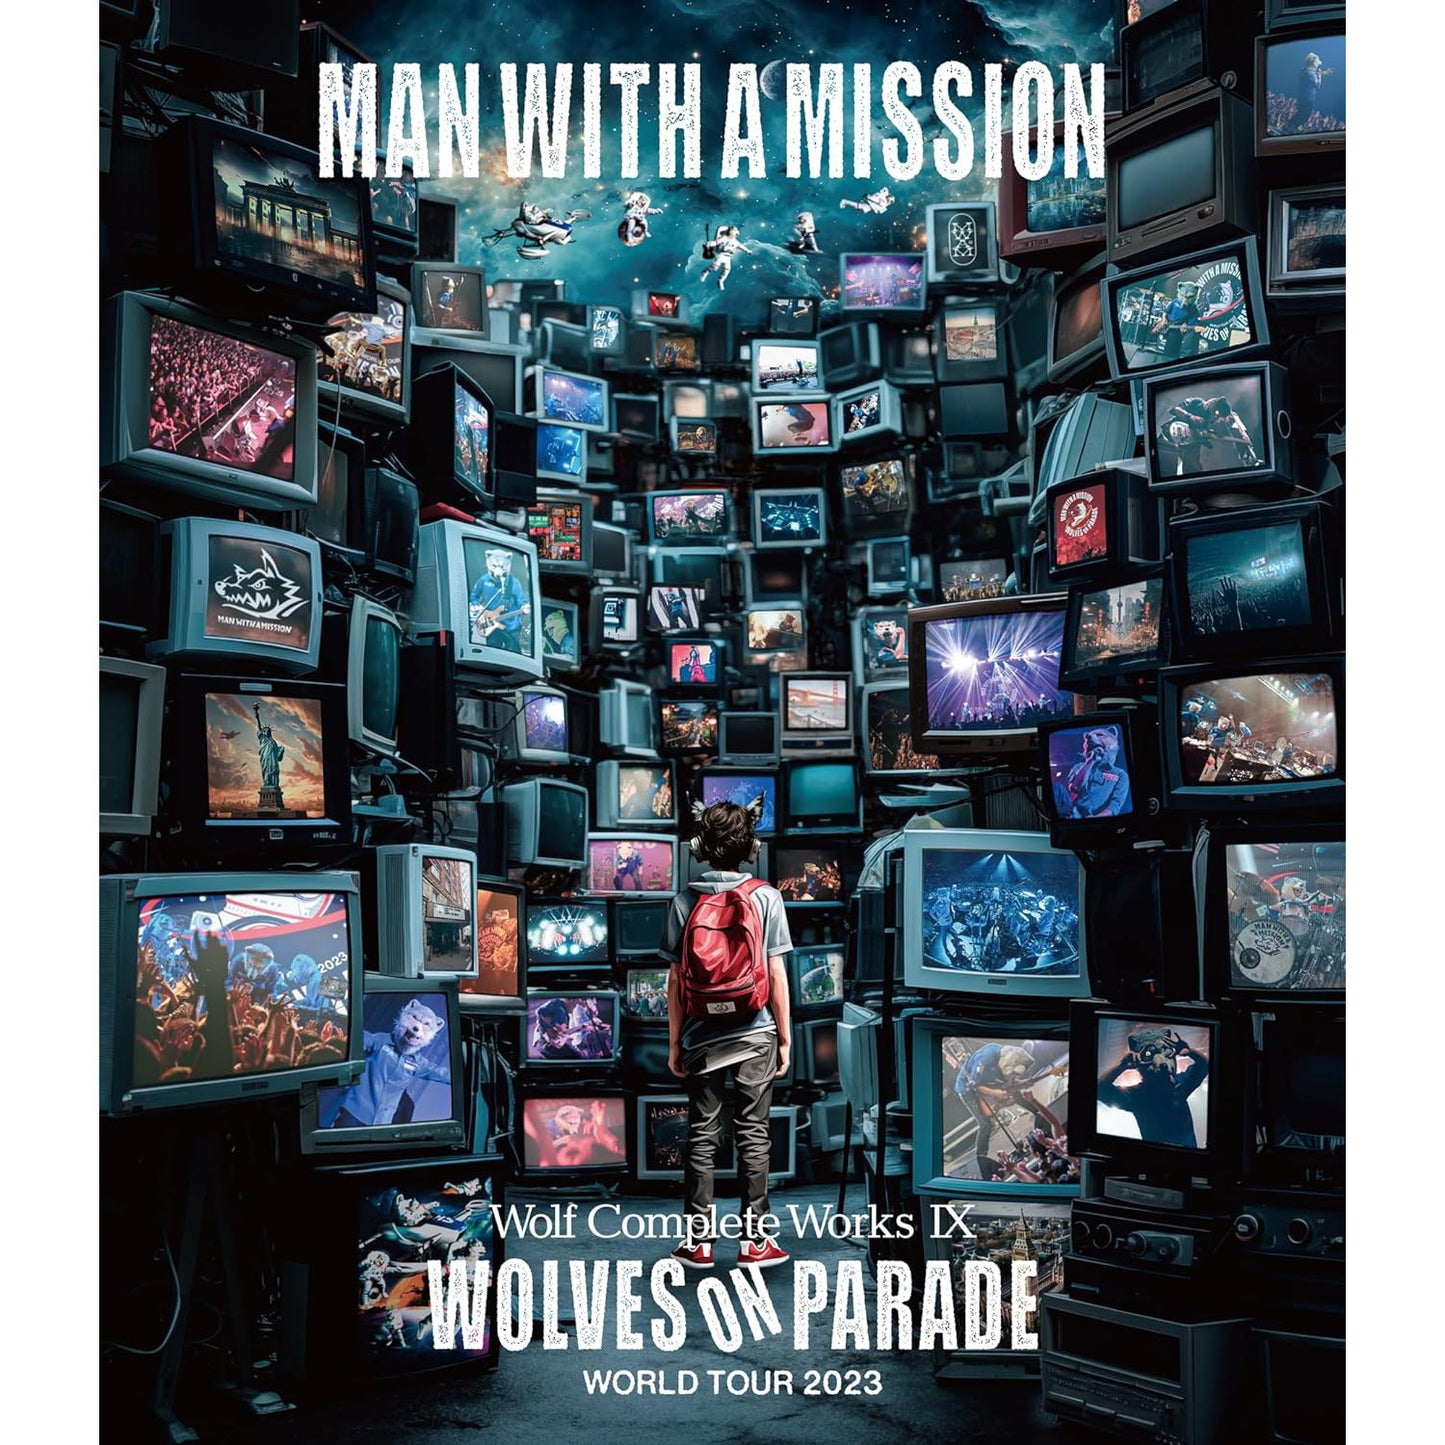 MAN WITH A MISSION Live Blu-ray《Wolf Complete Works Ⅸ ～WOLVES ON PARADE～ World Tour 2023》＜Blu-ray＞